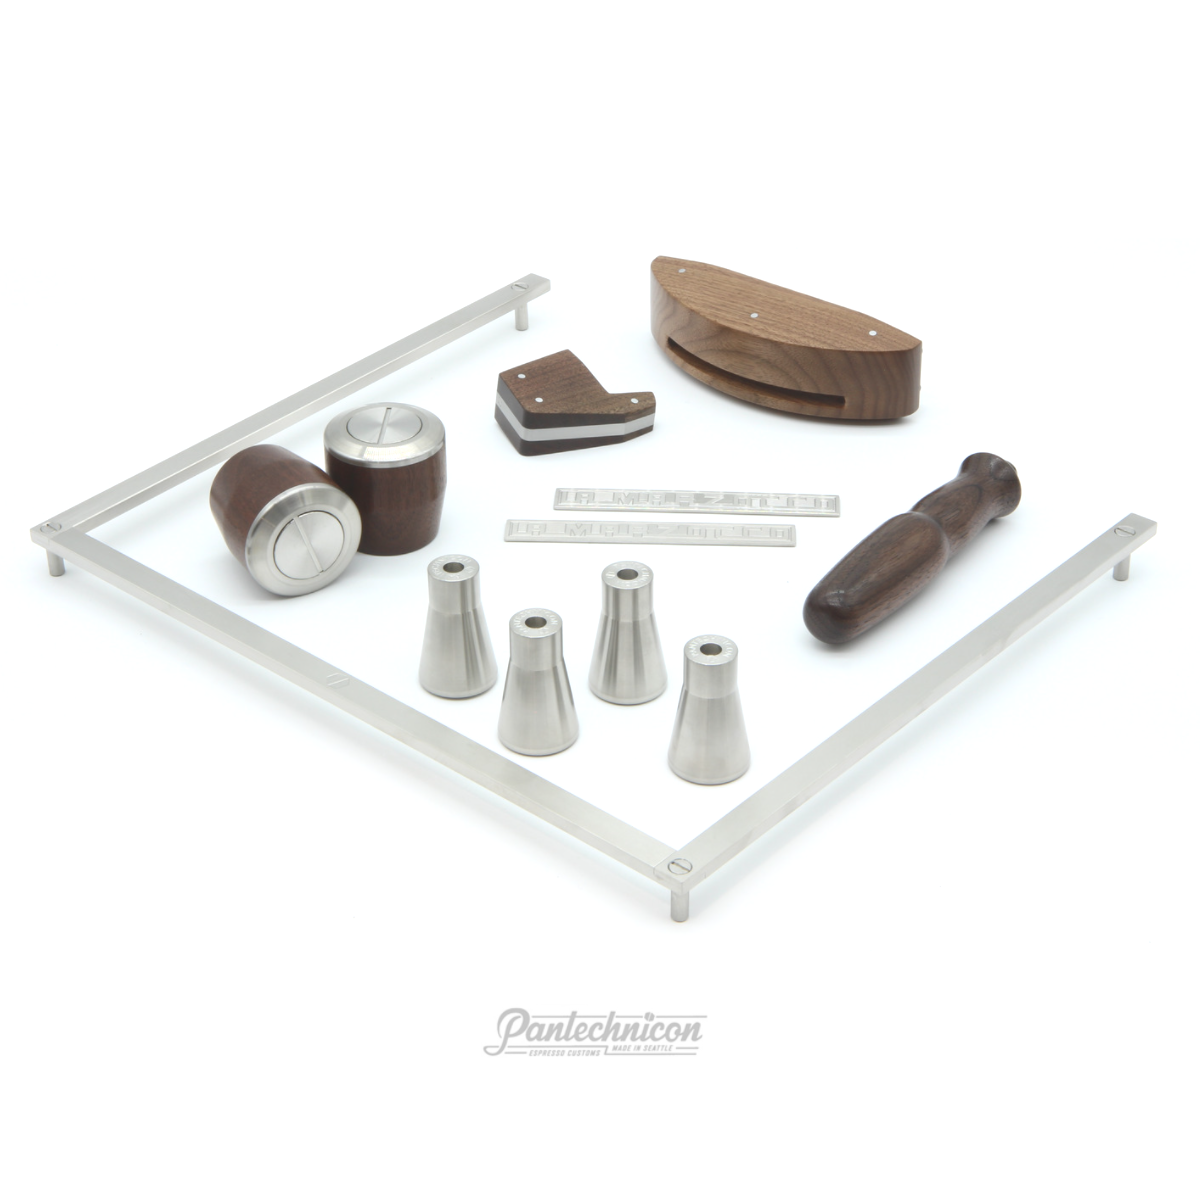 linea mini kit in walnut and brushed steel, handle only, 50mm legs